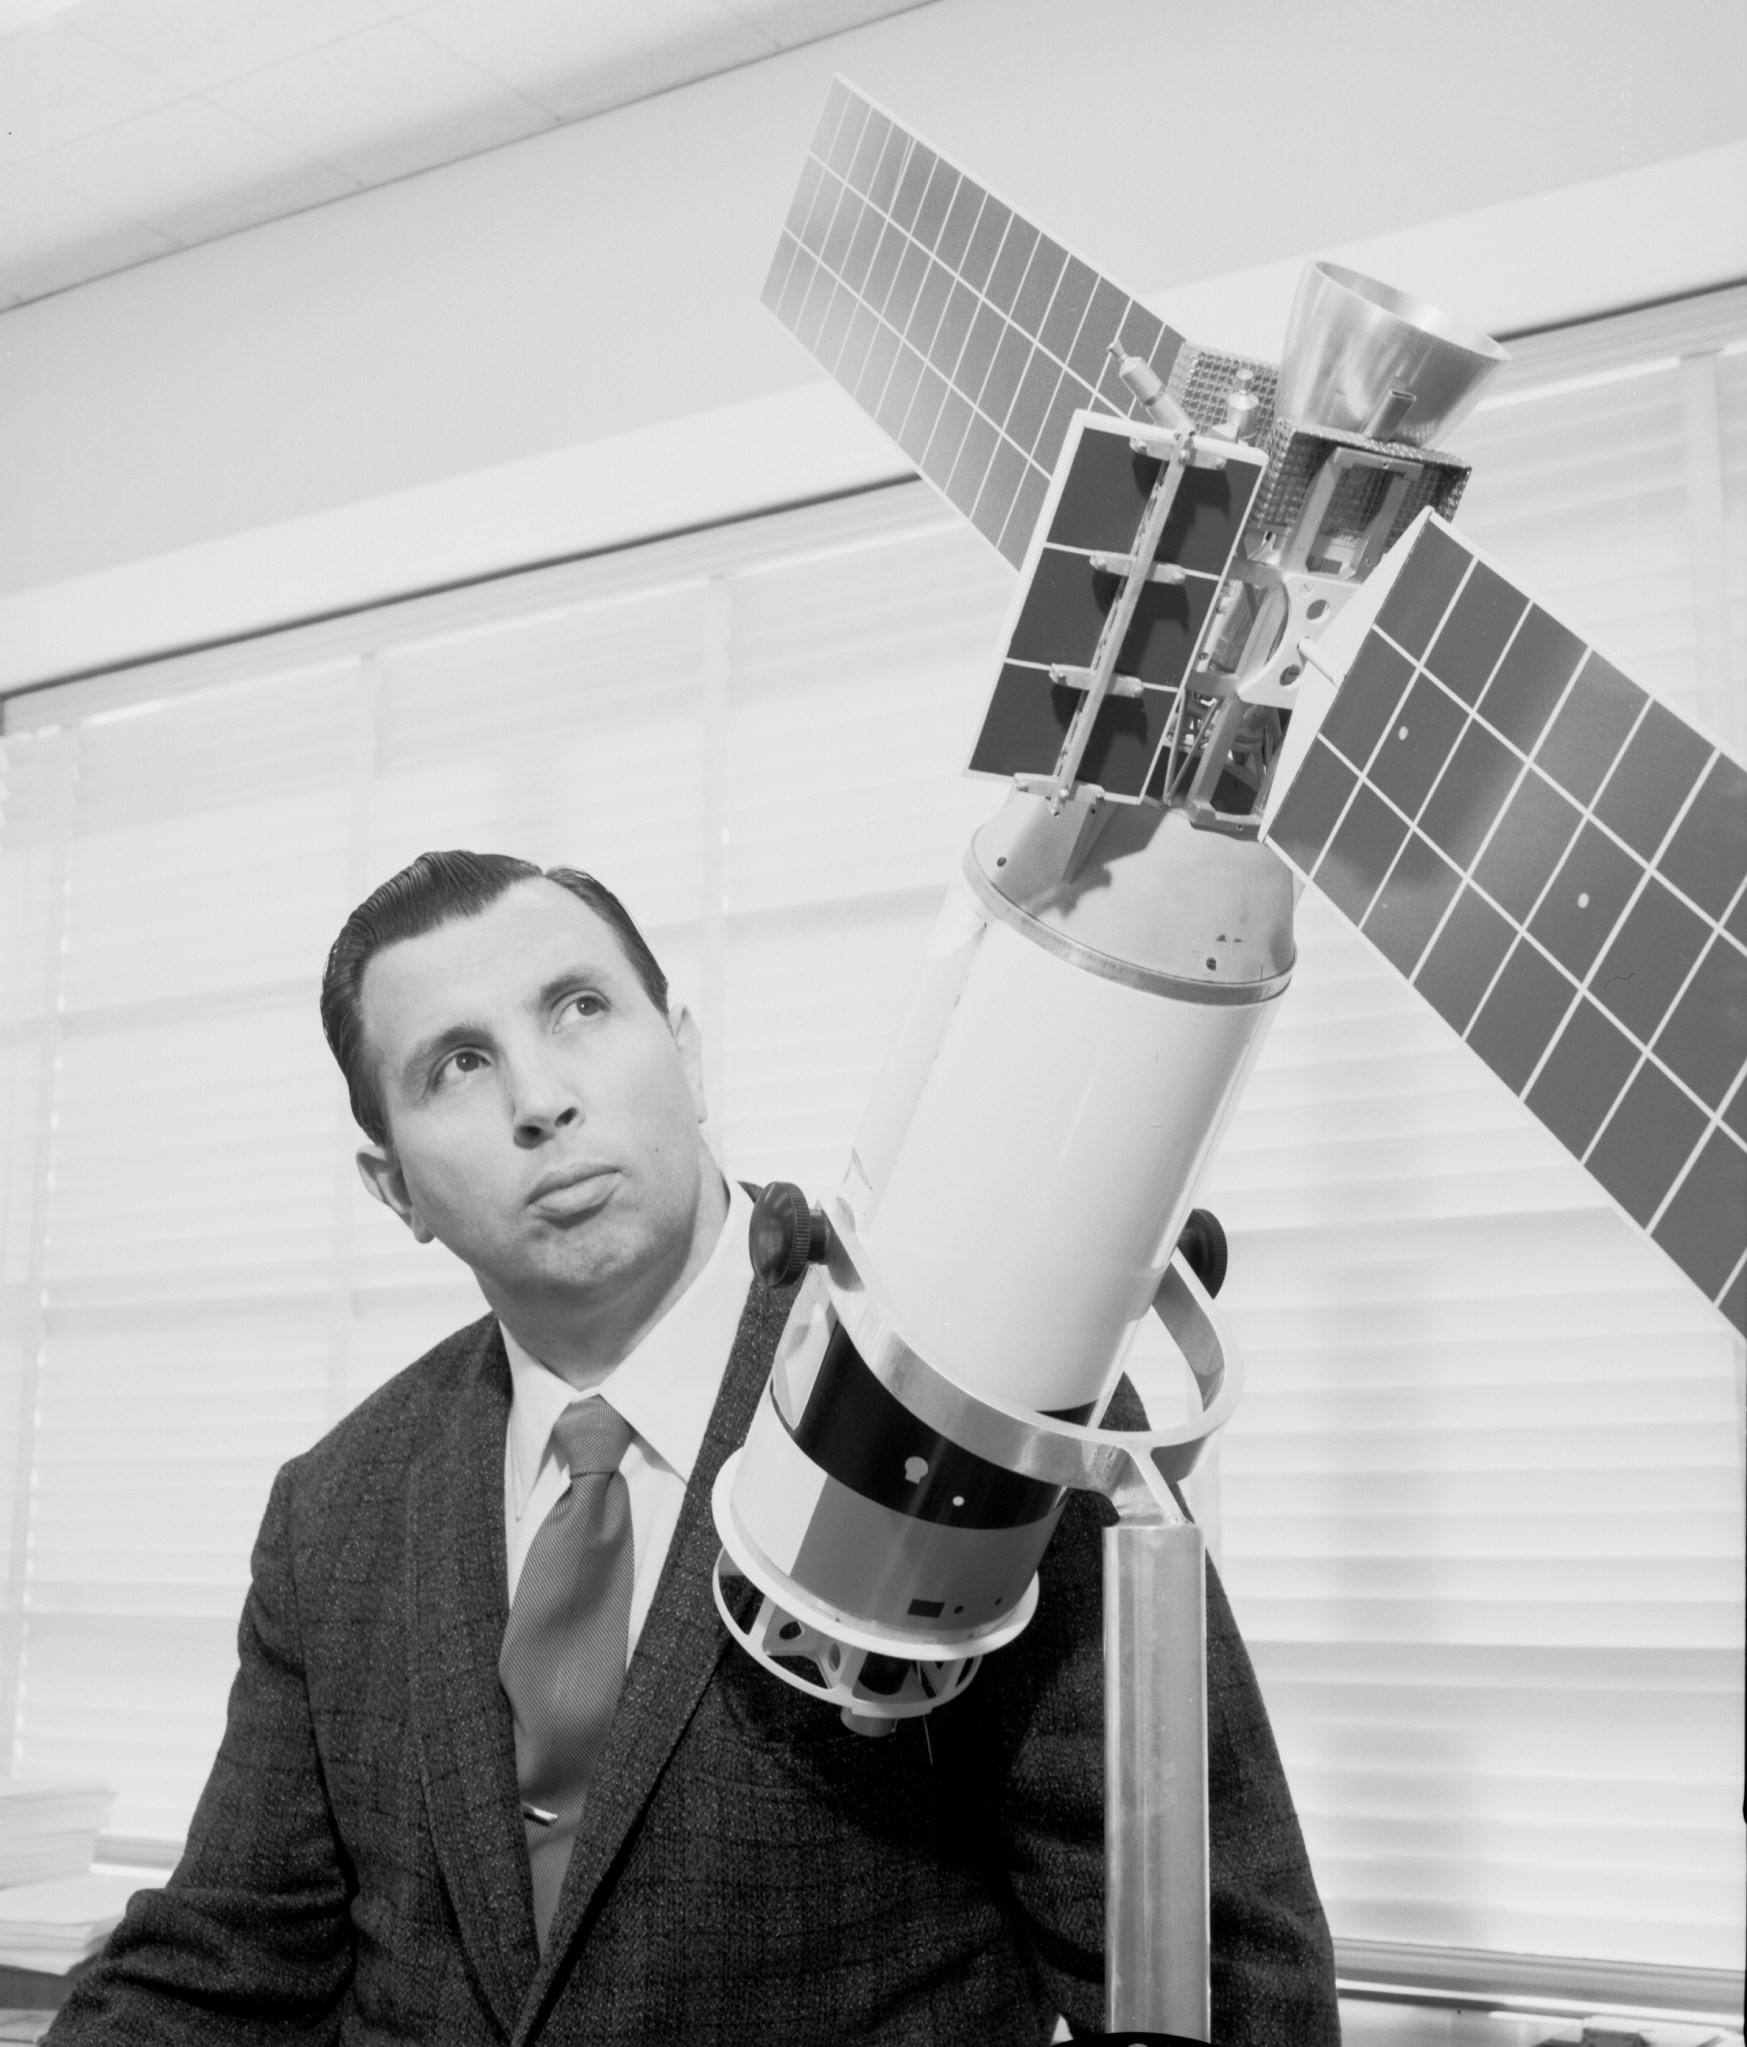 Man with spacecraft model.